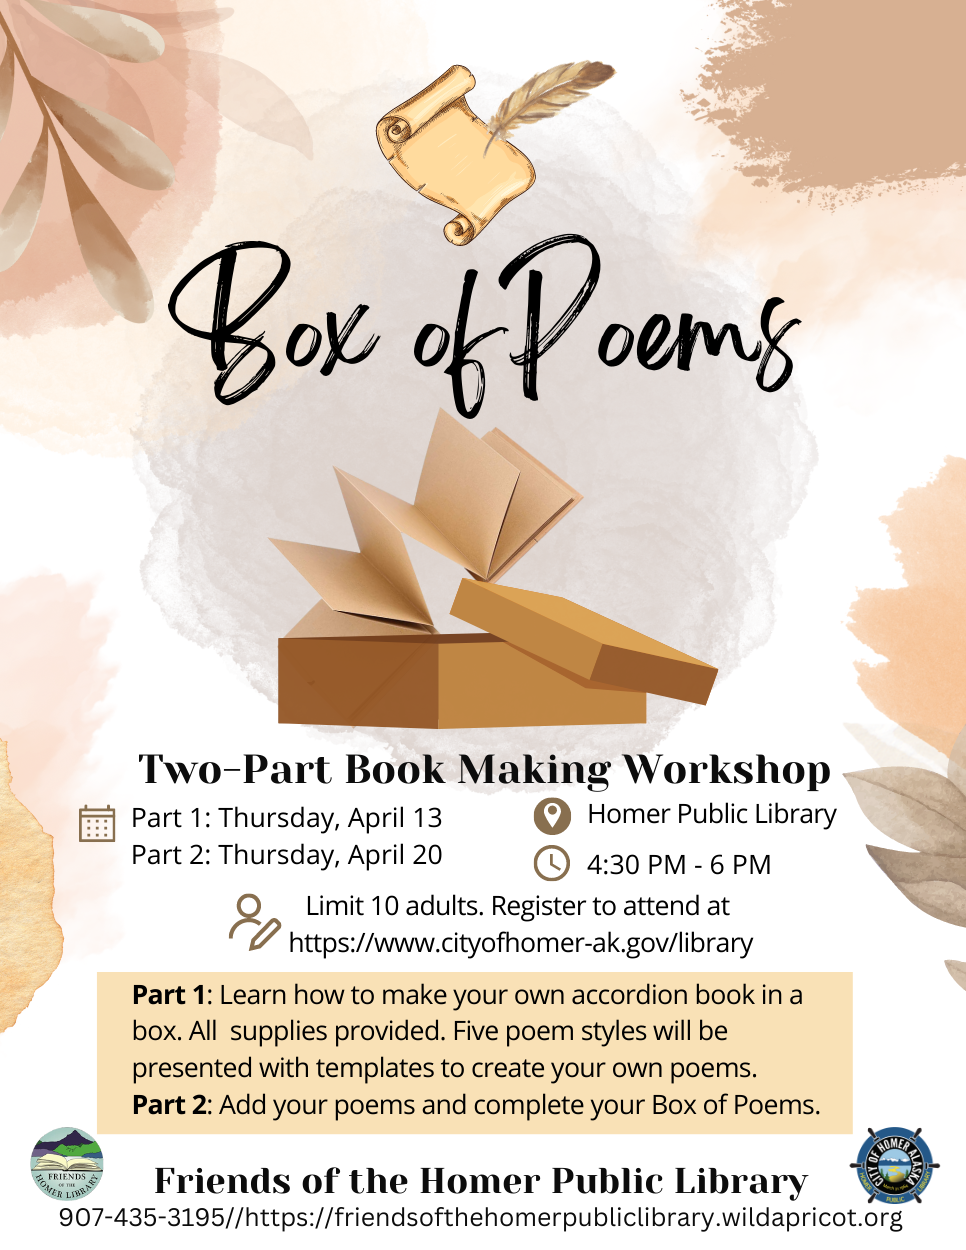 Box of Poems Workshop, April 13th and 20th at 4:30pm